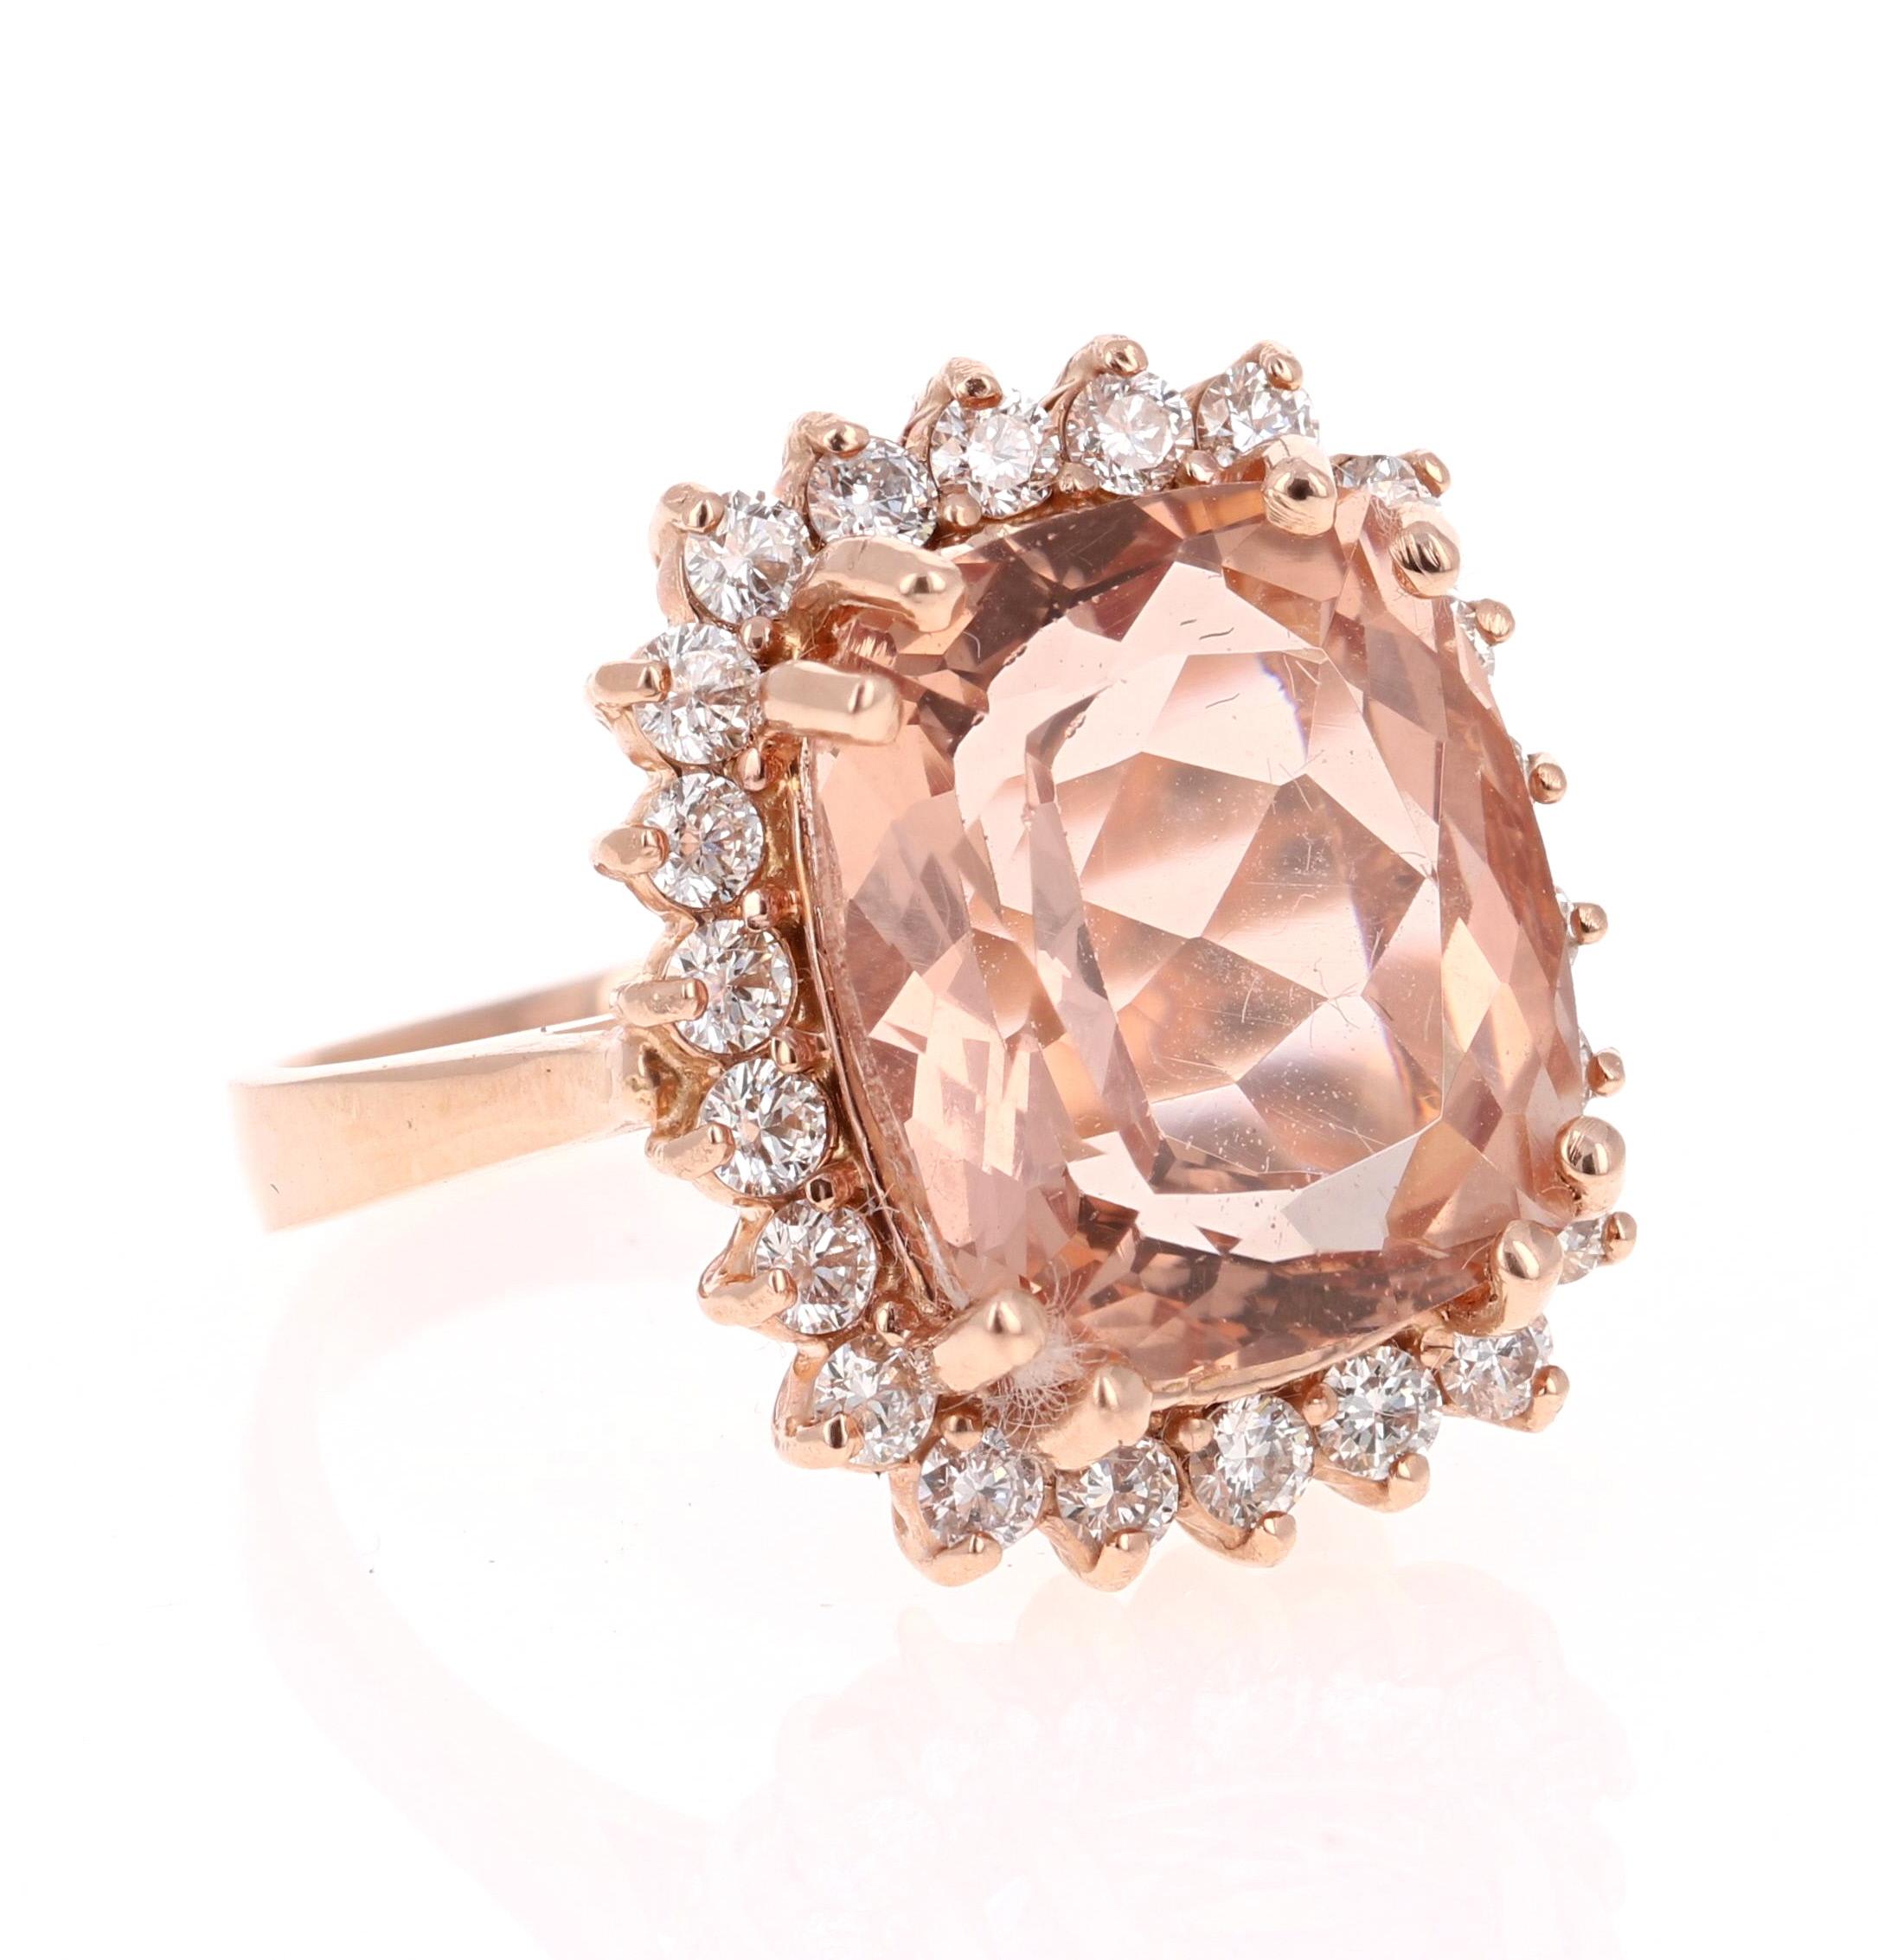 This Morganite ring has a 10.43 Carat Oval-Cushion Cut Morganite and is surrounded by 22 Round Cut Diamonds that weigh 0.84 Carats. Clarity: VS, Color: H. The total carat weight of the ring is 11.27 Carats.  

Crafted in 14 Karat Rose Gold and